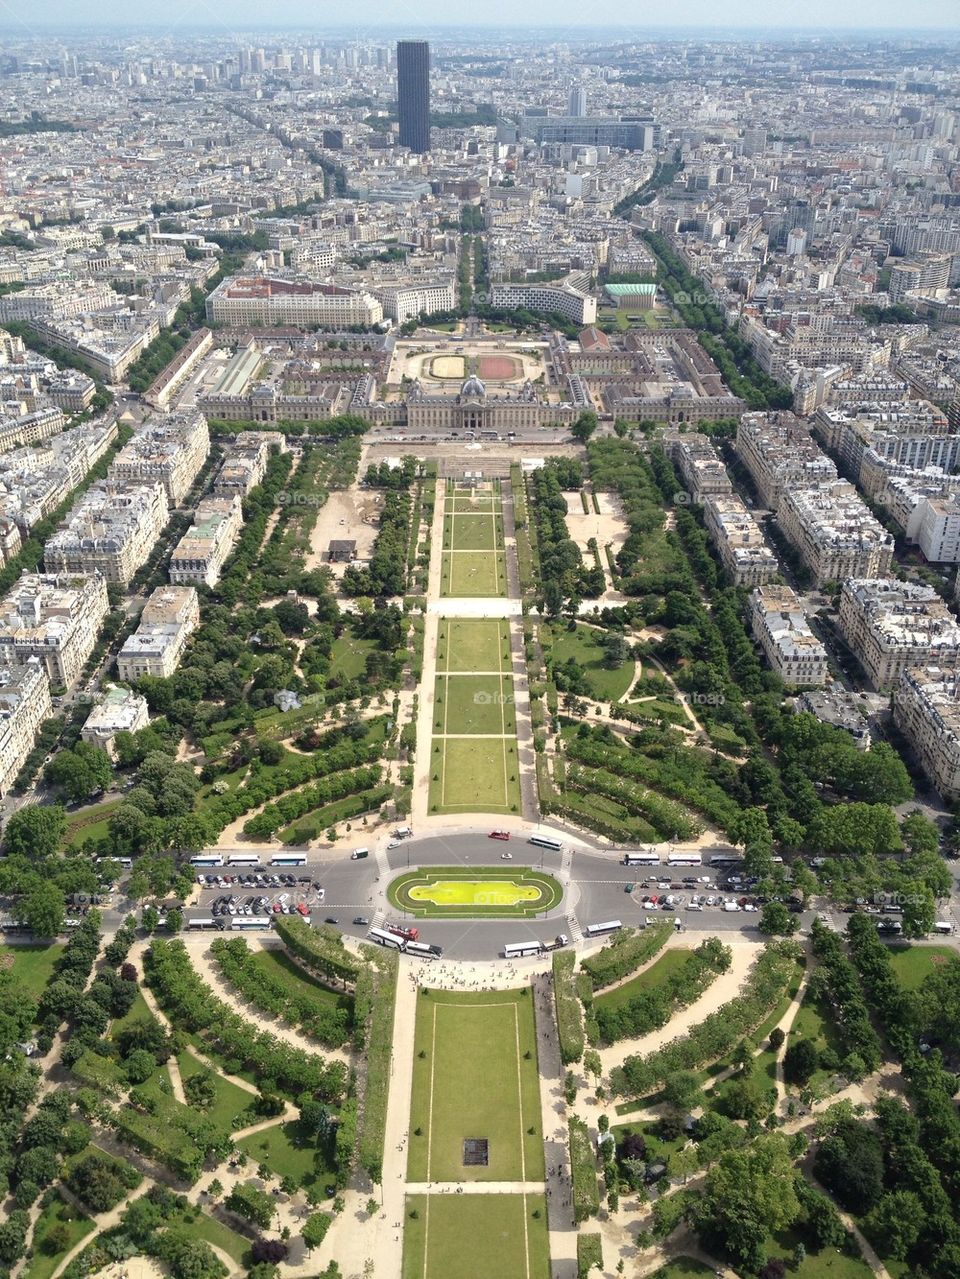 Aerial view of Paris from the Eiffel Tower